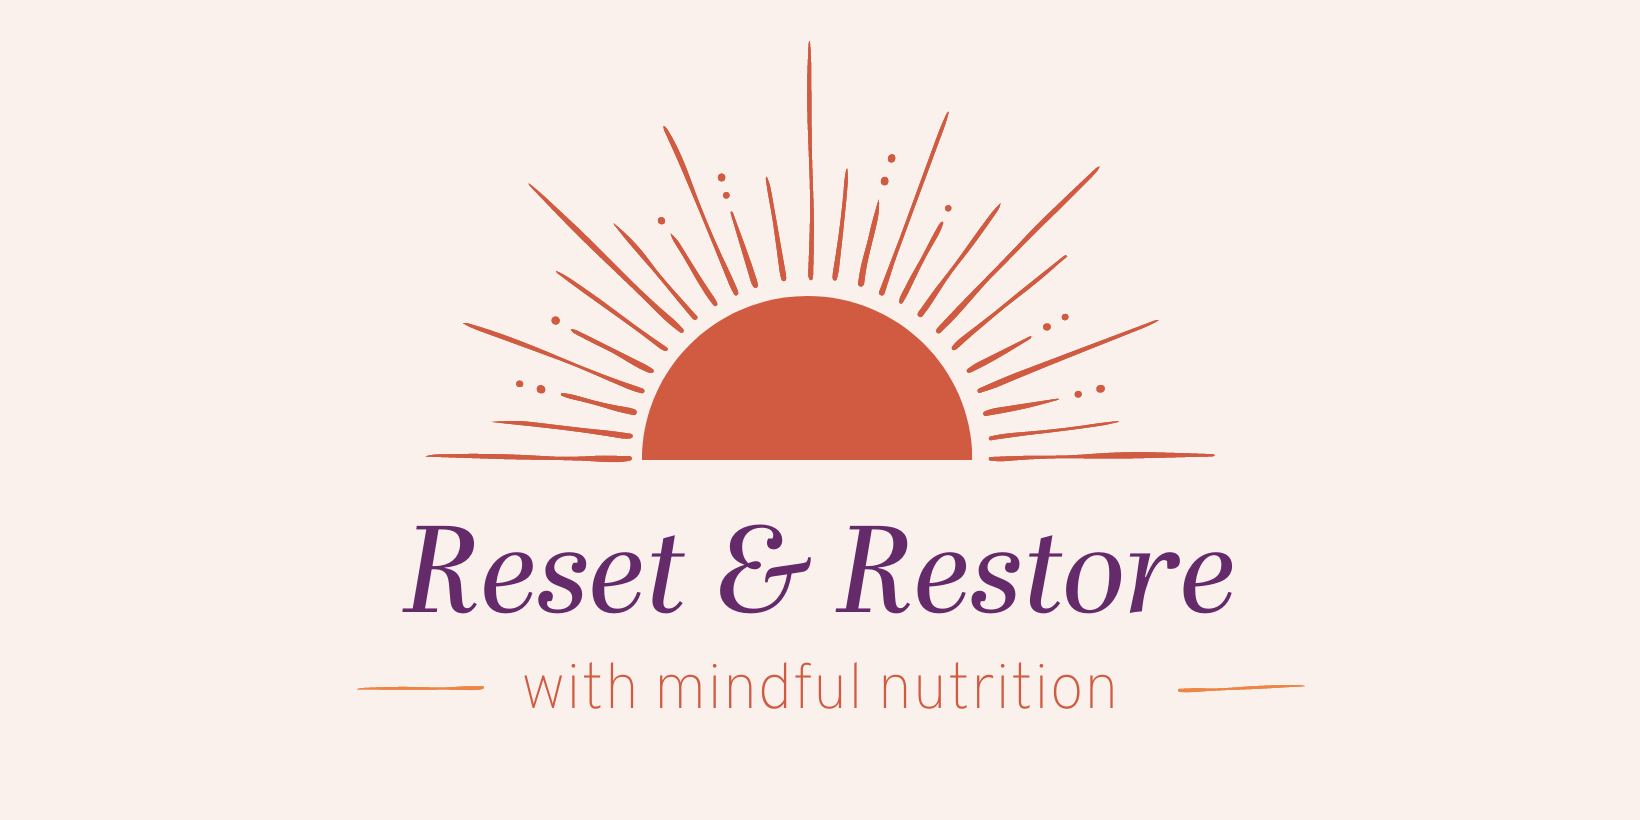 Reset & Restore with Mindful Nutrition promotional image